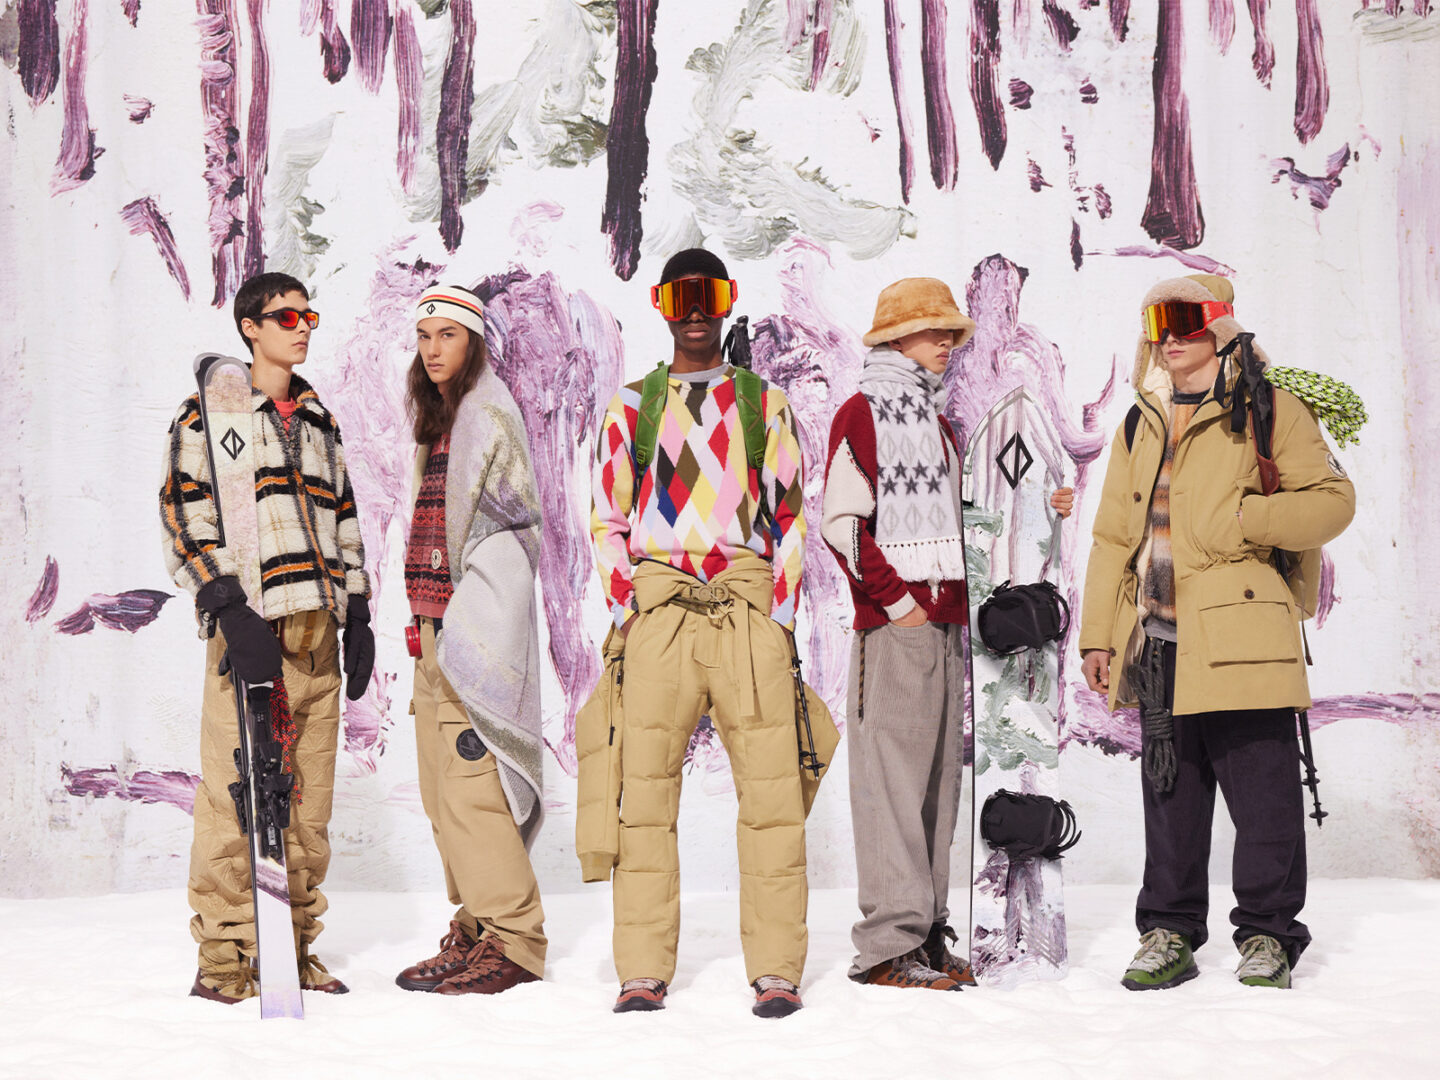 Dior Ski: Where design, innovation, the outdoors and hiking meet